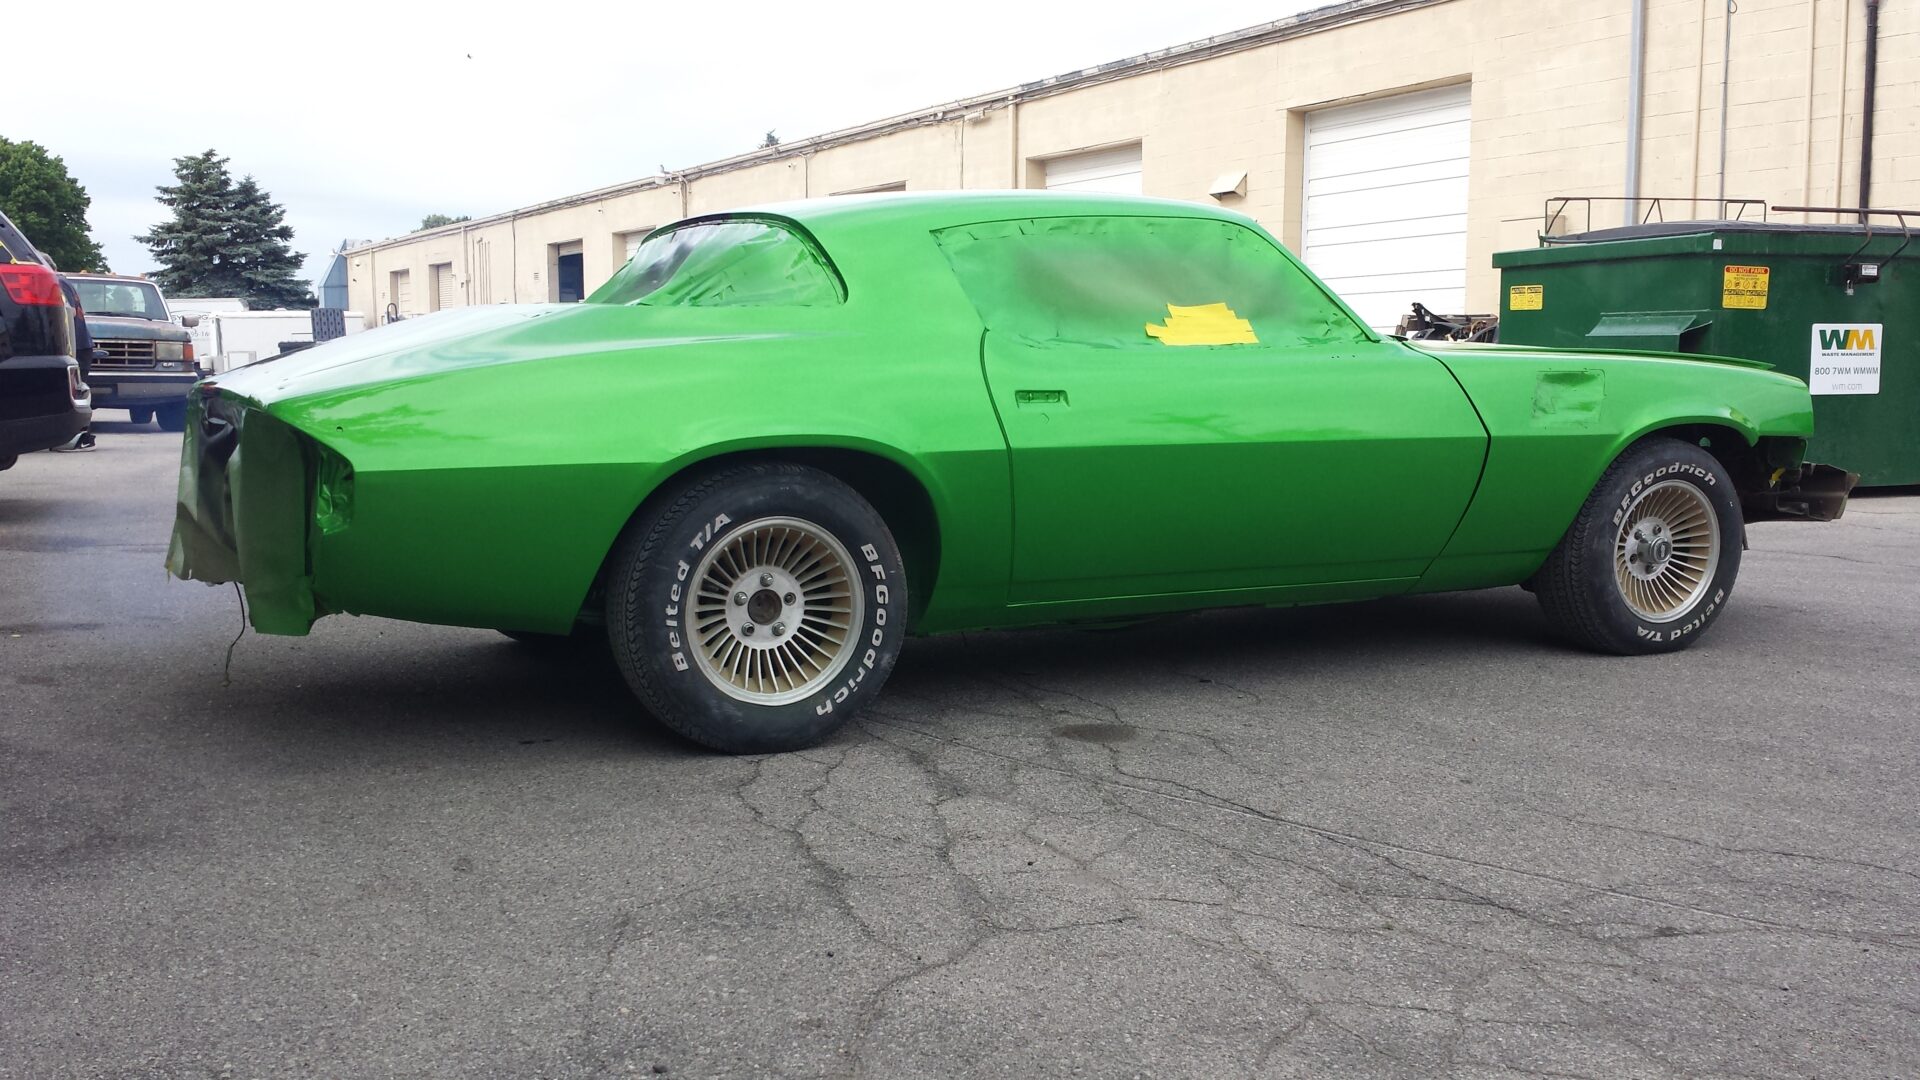 A 1978 Chevy Camaro Z28 with fresh green paint